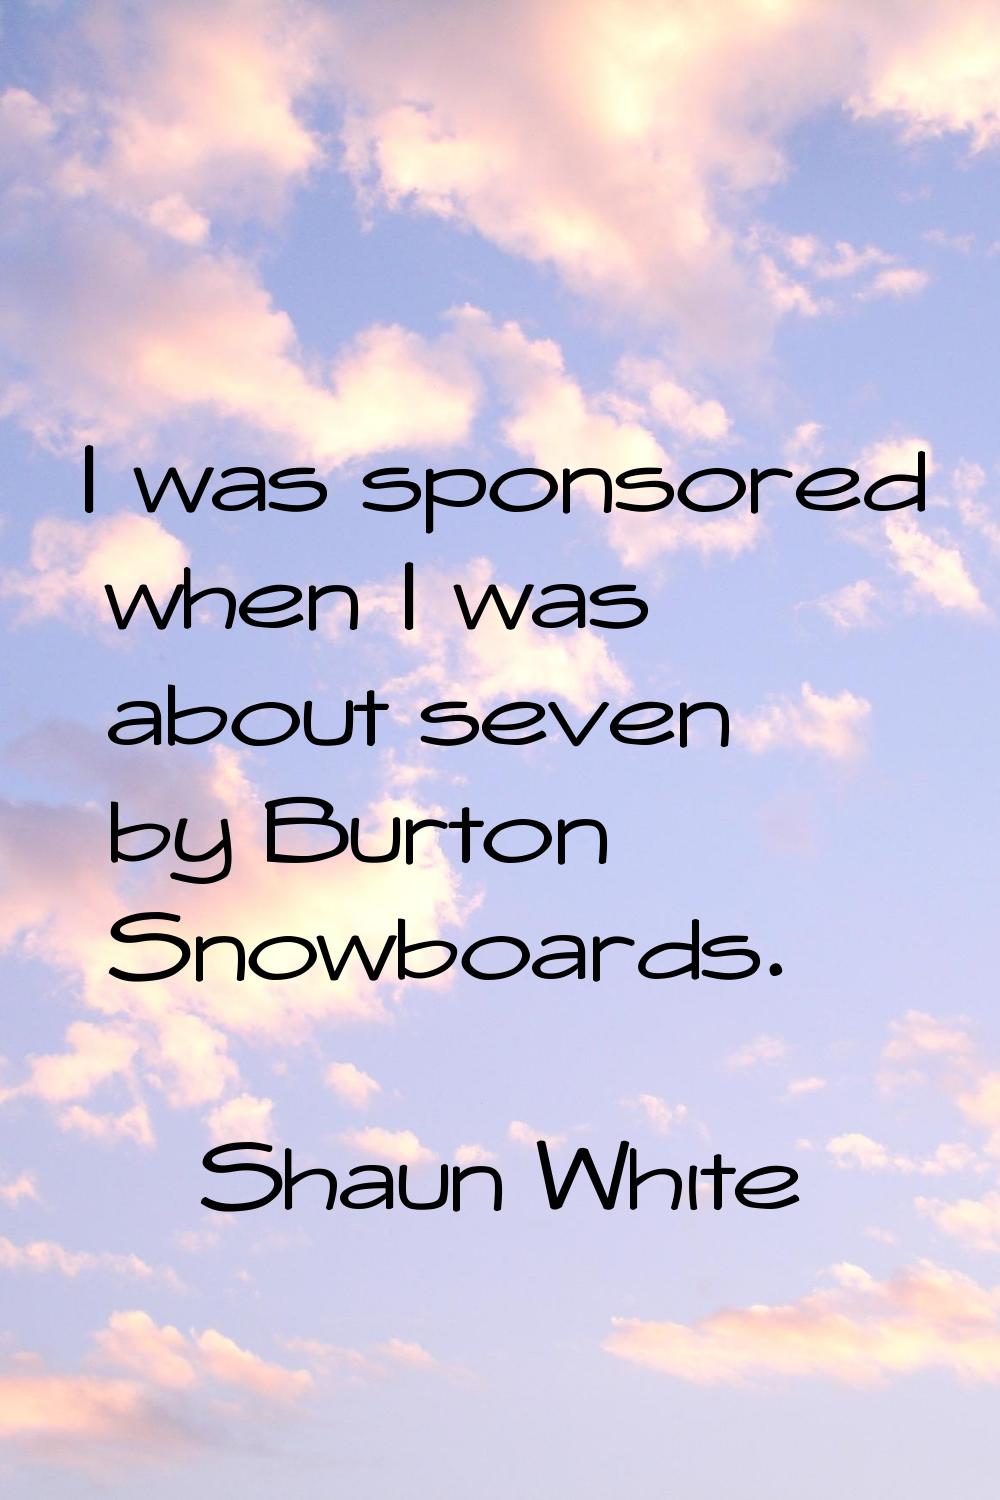 I was sponsored when I was about seven by Burton Snowboards.